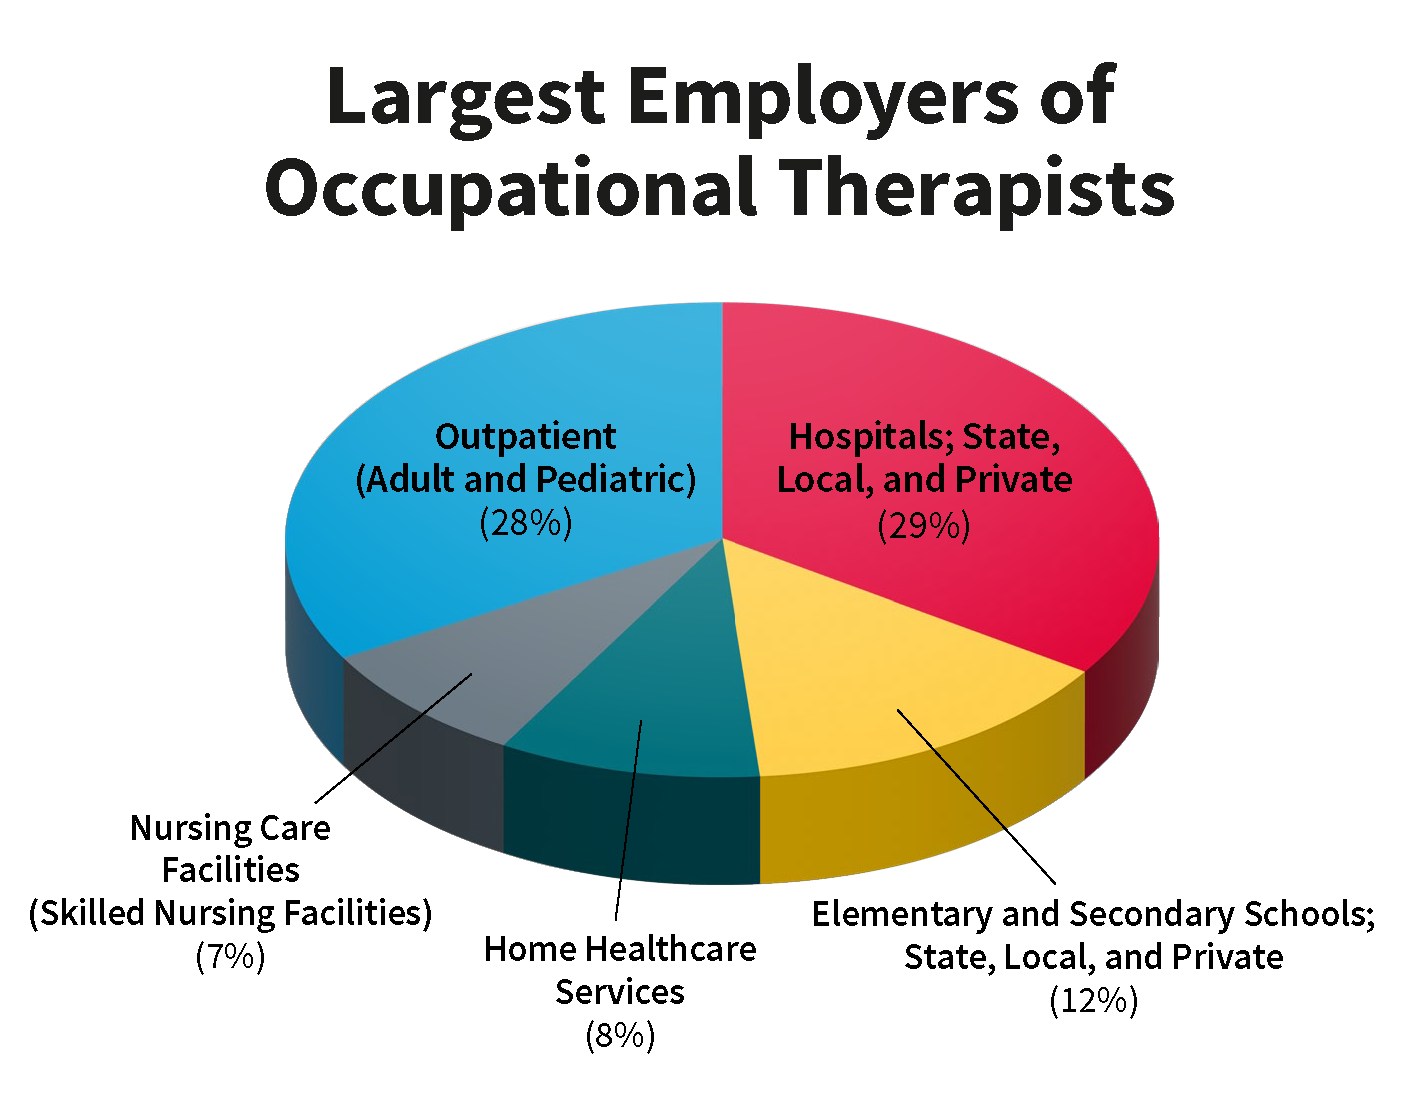 Largest Employre of Occupational Therapists Pie Chart